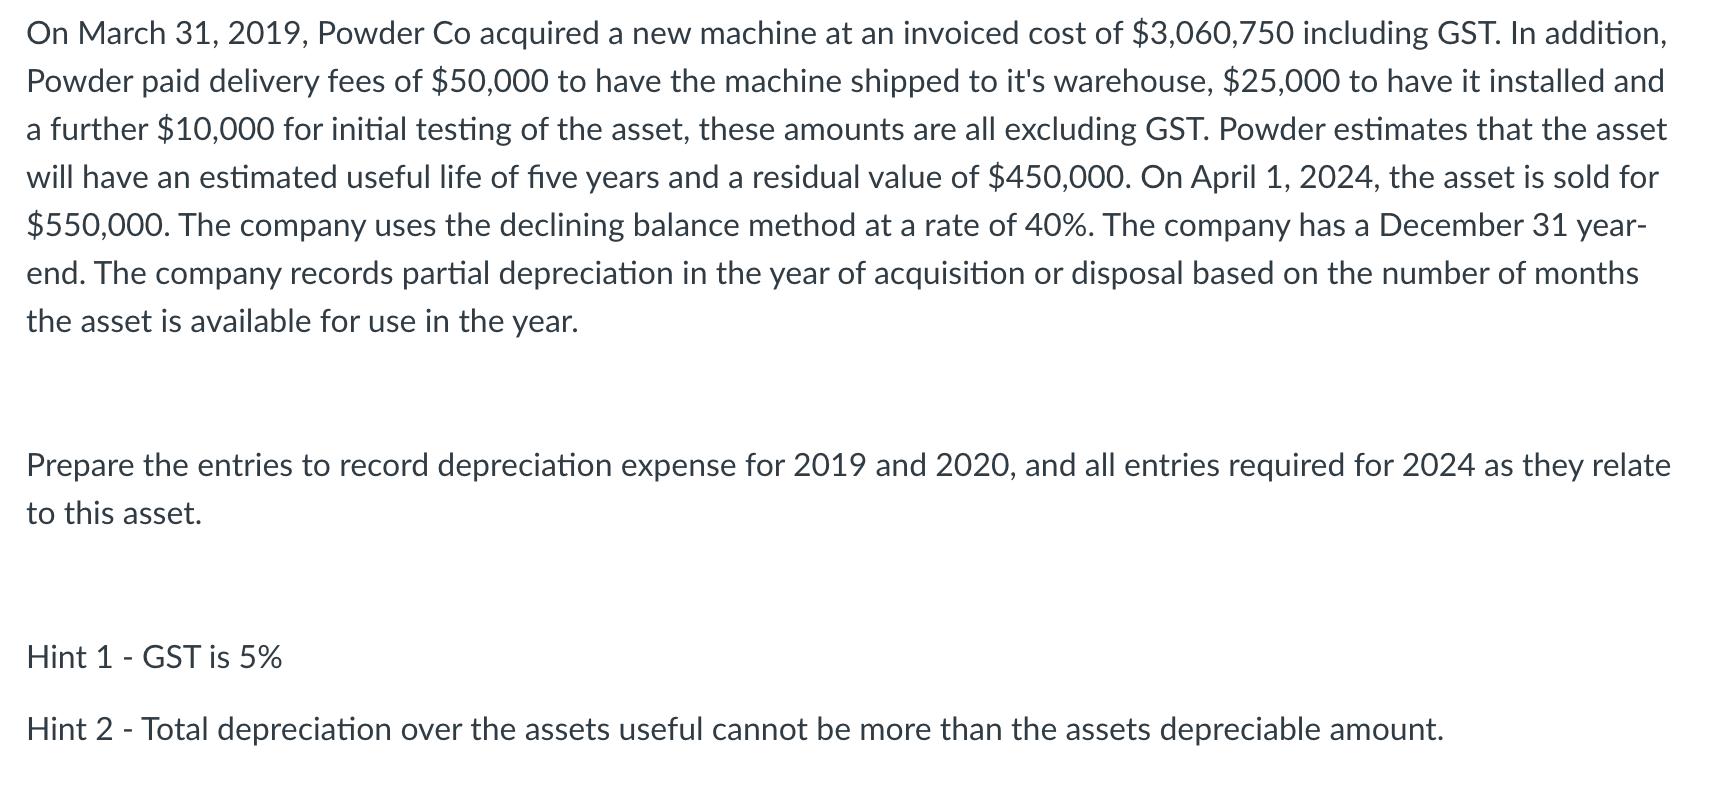 On March 31, 2019, Powder Co acquired a new machine at an invoiced cost of $3,060,750 including GST. In addition, Powder paid